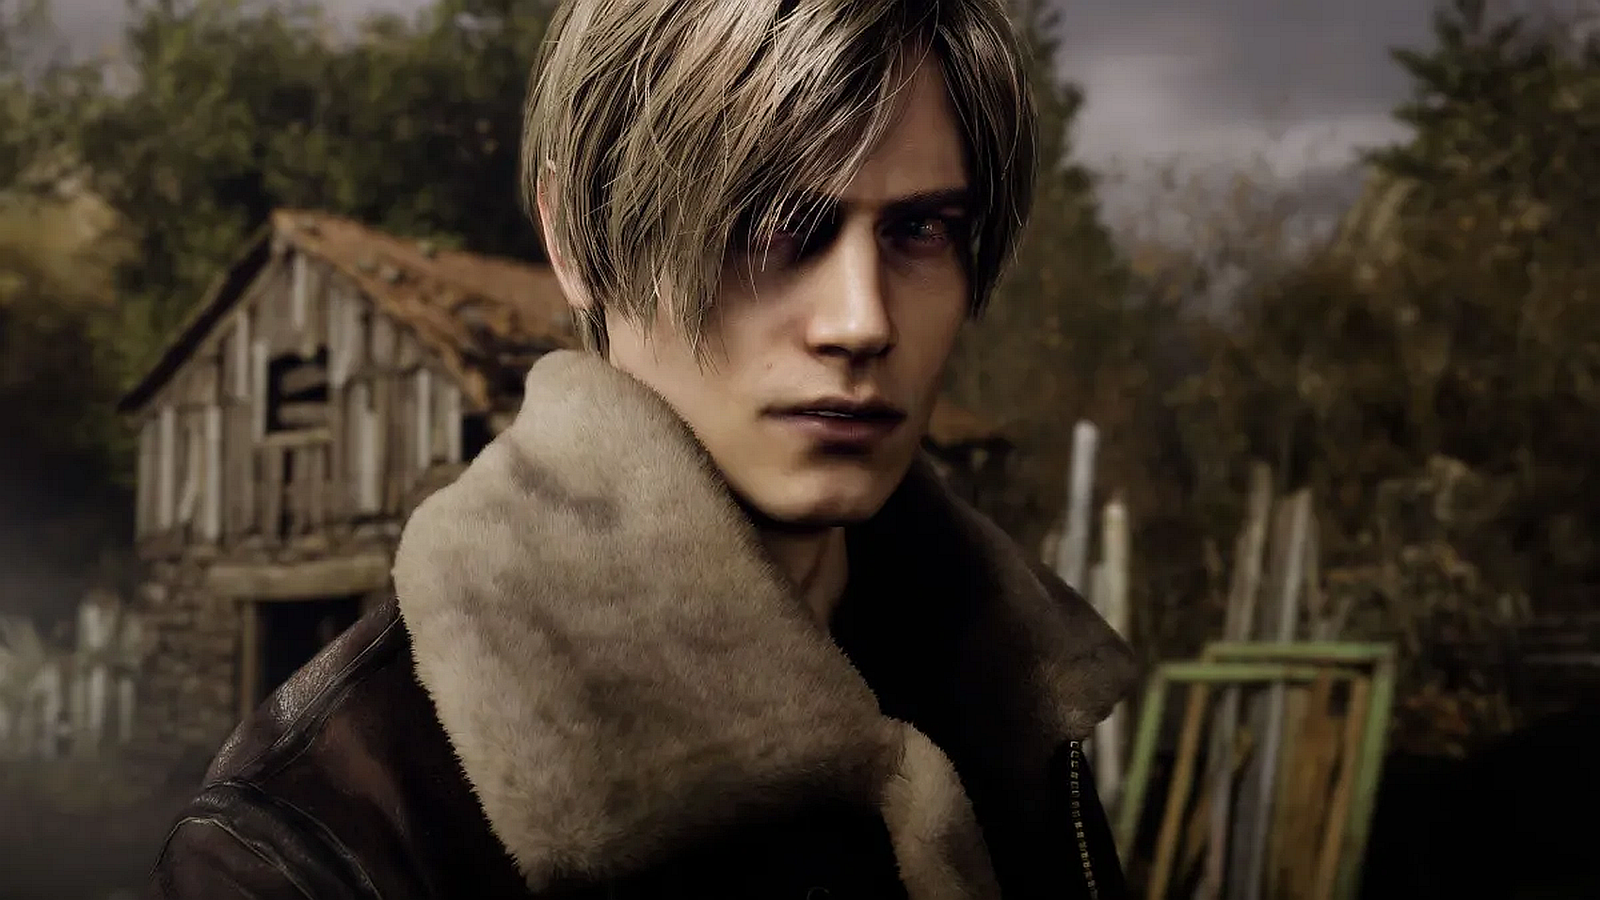 Resident Evil 4's Chainsaw Demo leaves us with mixed hopes for